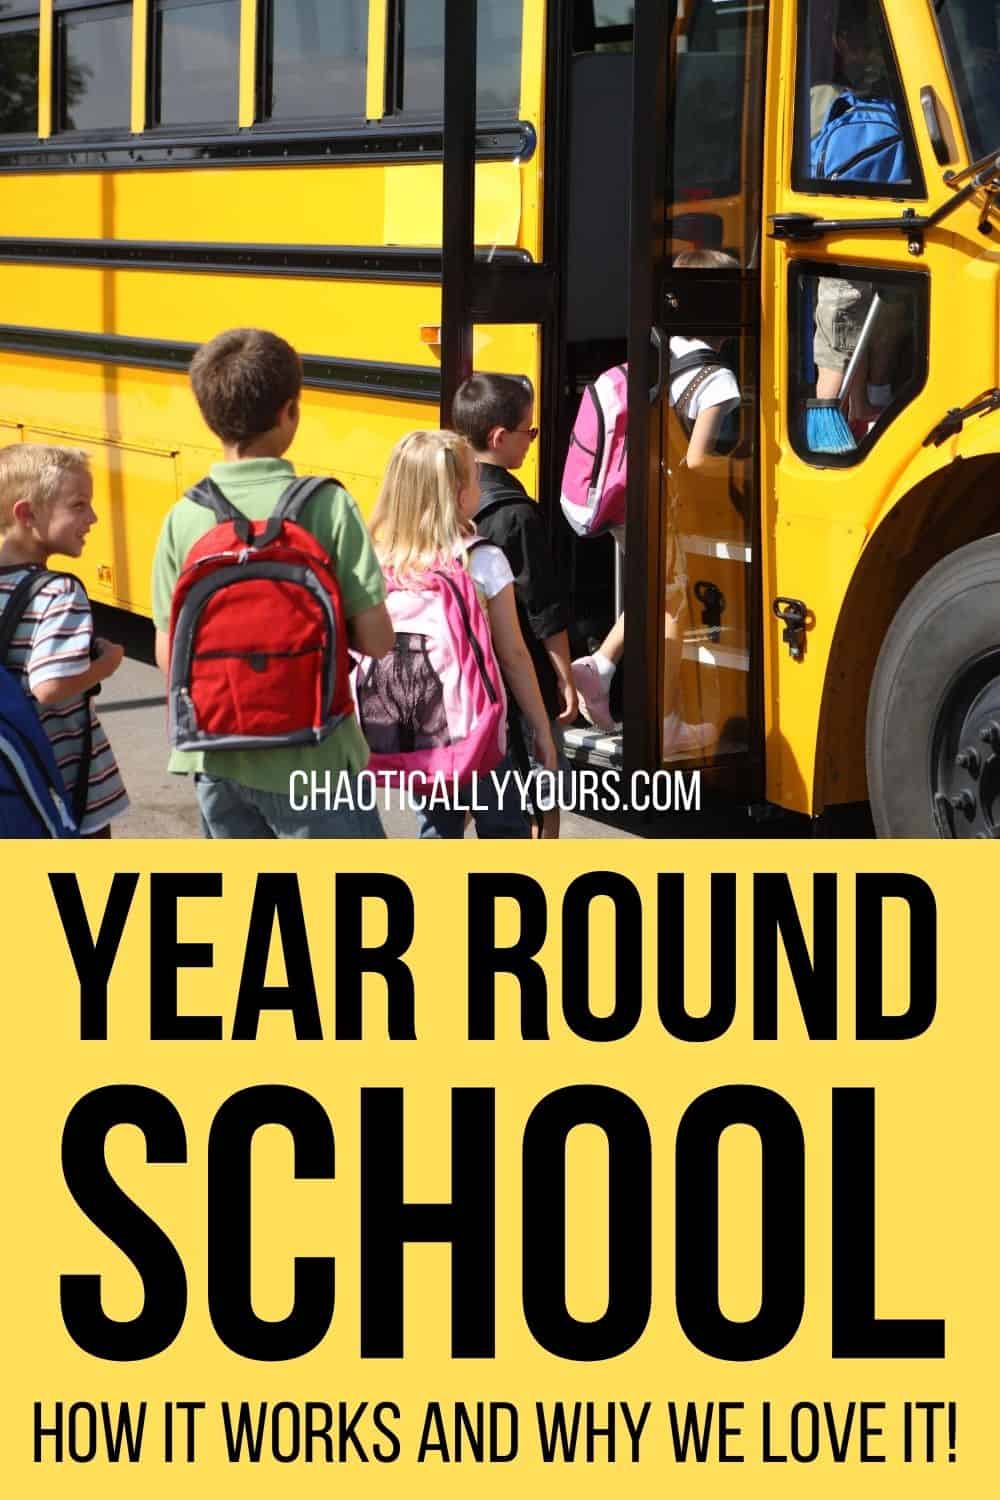 year-round-school-how-it-works-and-why-it-s-awesome-chaotically-yours